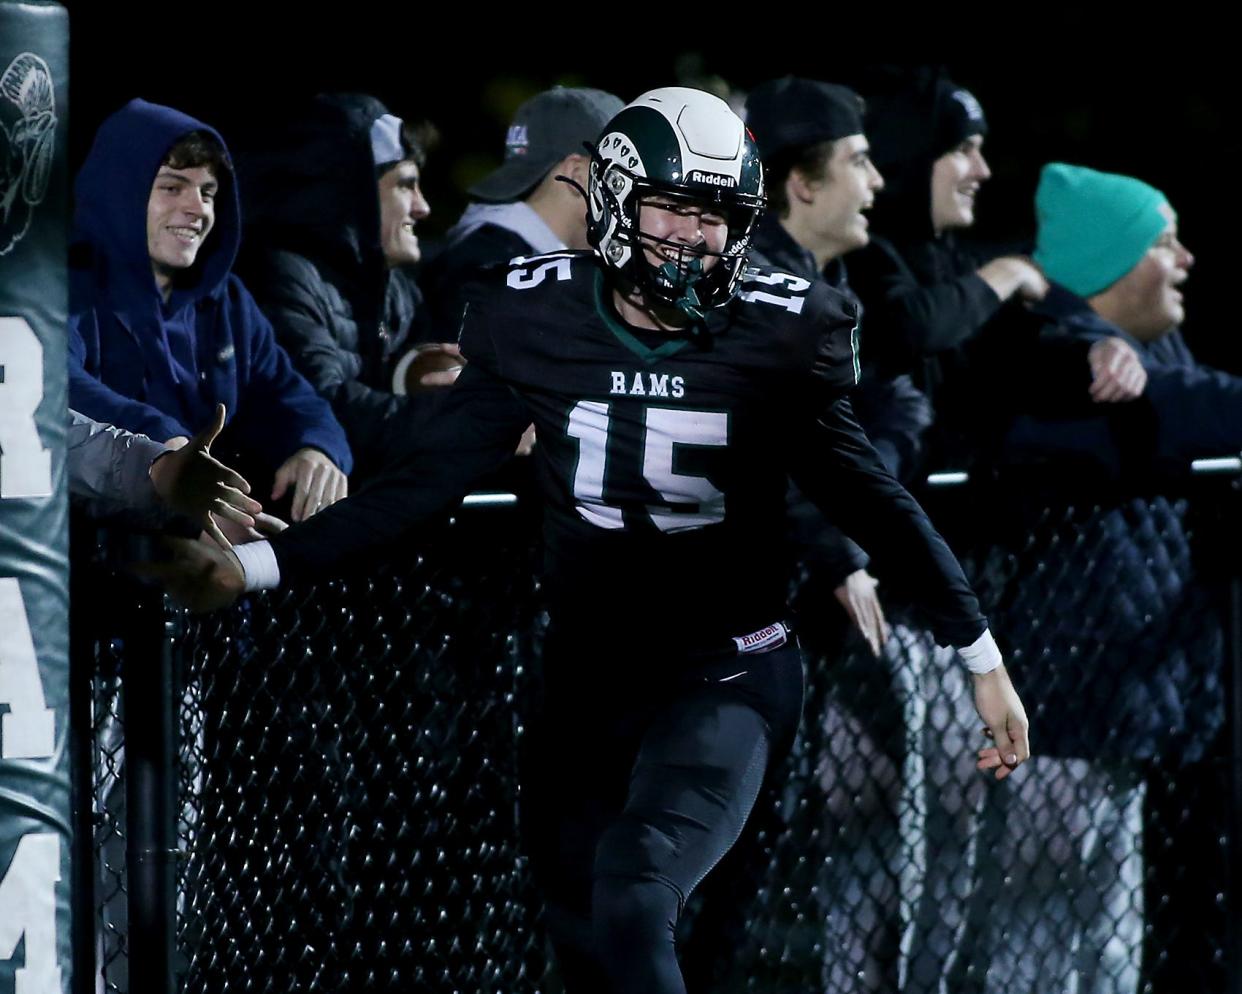 Marshfield's Tor Maas is all smiles after celebrating his touchdown with classmates to give Marshfield the 28-13 over Plymouth North during third quarter action of their game in the Sweet 16 round of the Division 2 state tournament at Marshfield High on Friday, Nov. 3, 2023. Marshfield would go on to win 55-34.